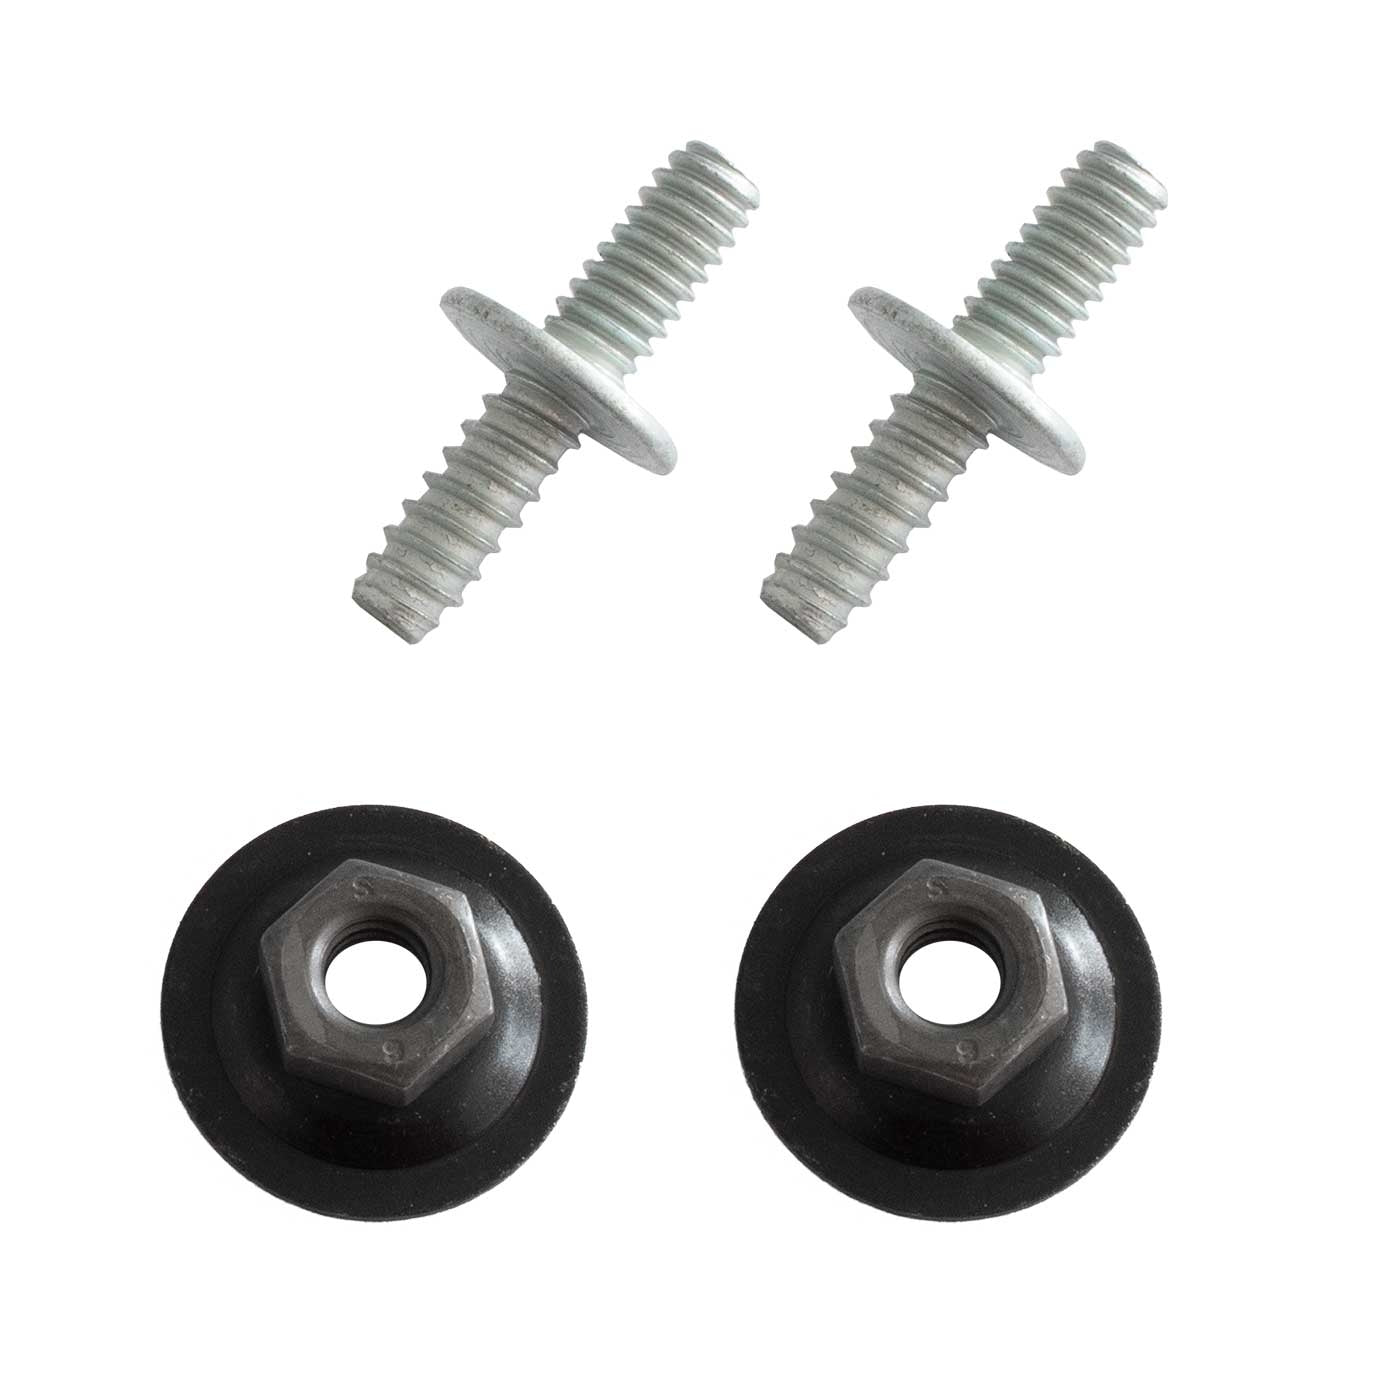 1979-1993 Mustang Lower Front Fender Extension Spat Hardware Studs & Nuts 4pc